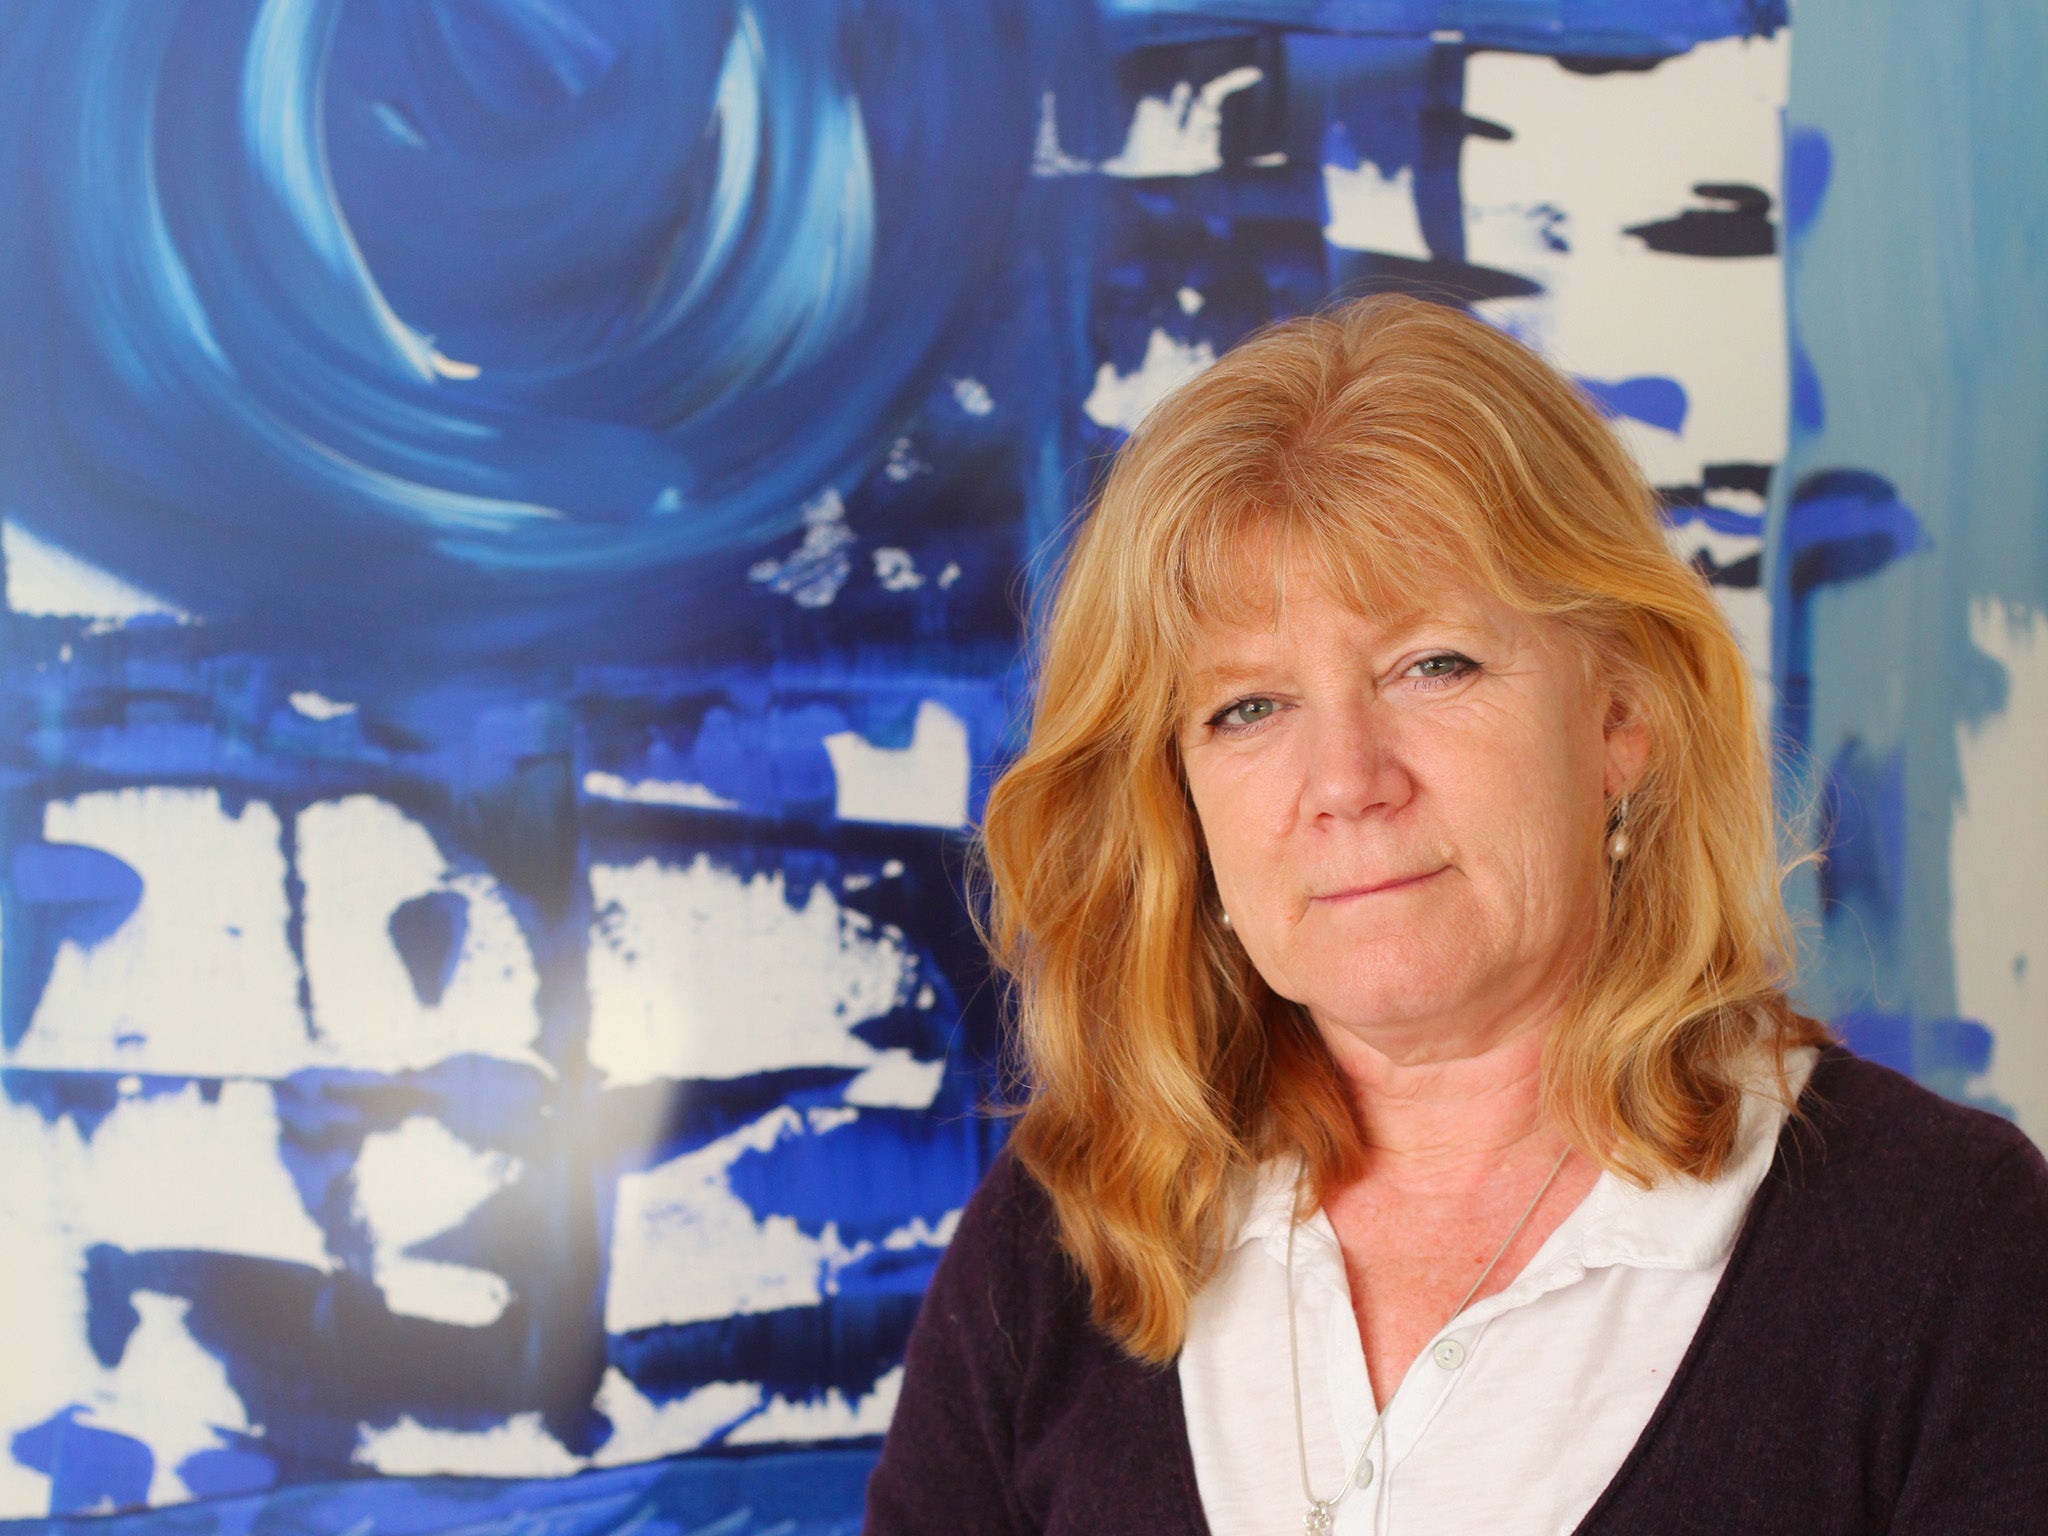 &#13;
Camilla Lindfield with daughter Hannah's artwork 'my blue'&#13;